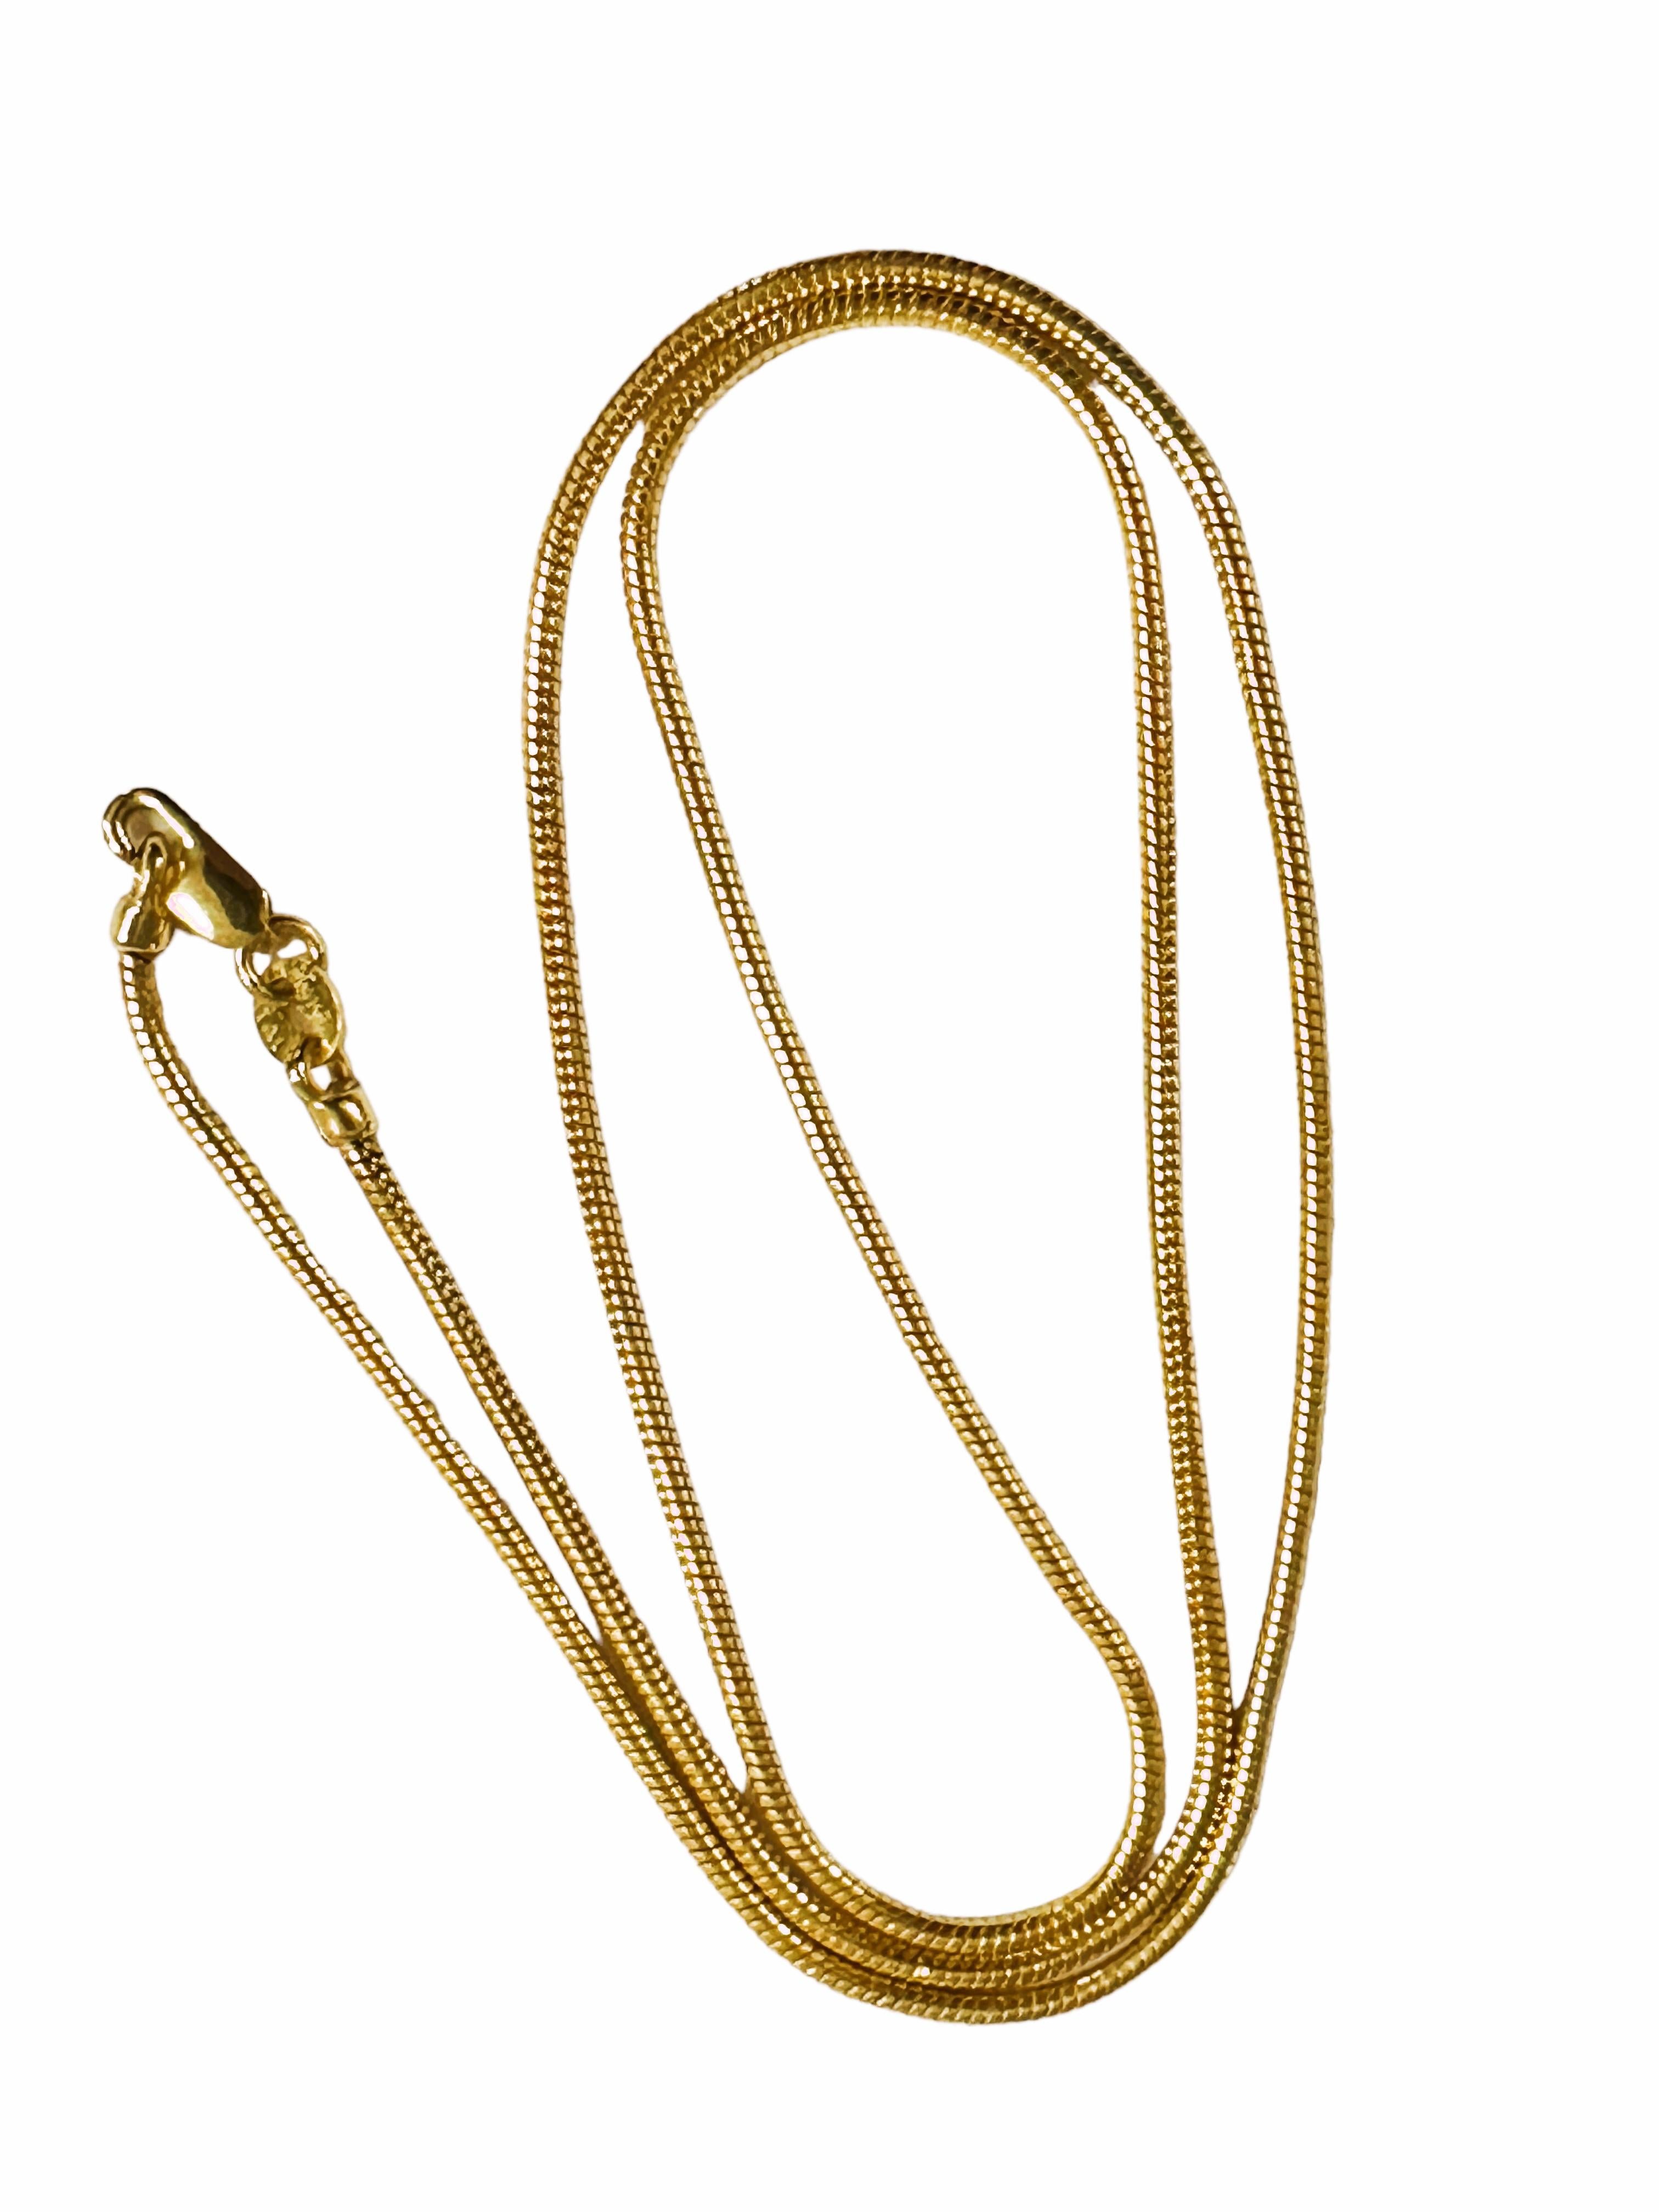 14K Yellow Gold Italian Round Chain 18 Inches 4.51 Grams For Sale 1